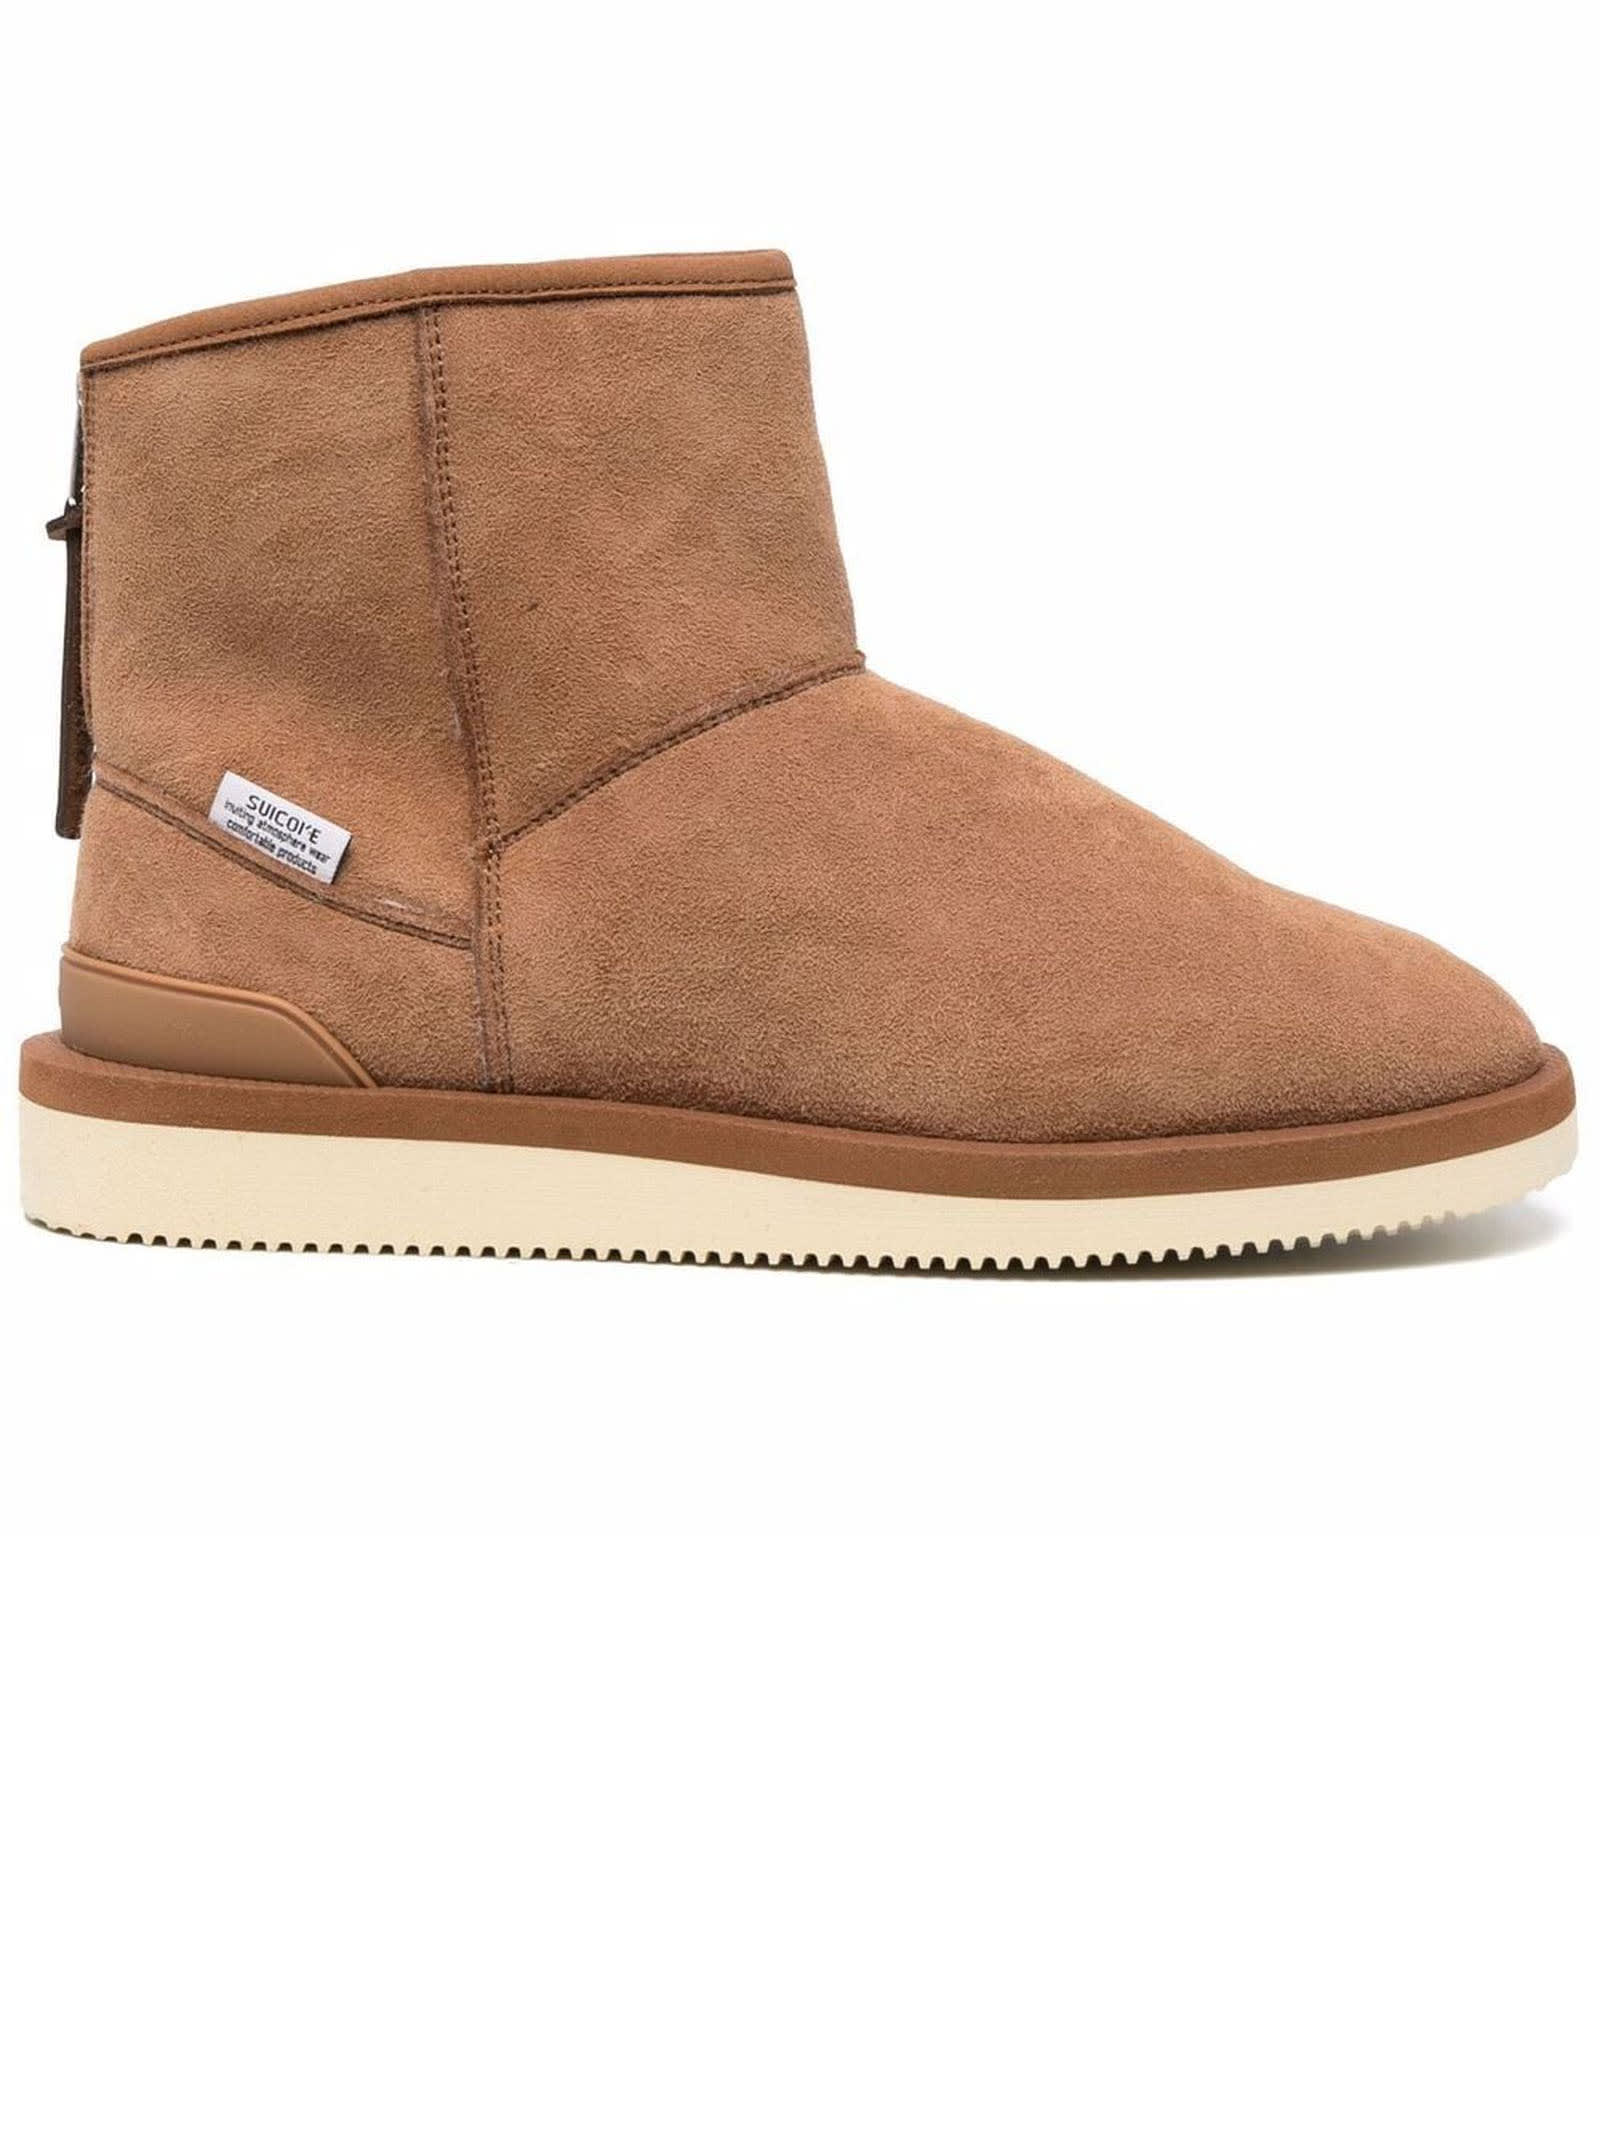 SUICOKE BROWN SUEDE ANKLE BOOTS